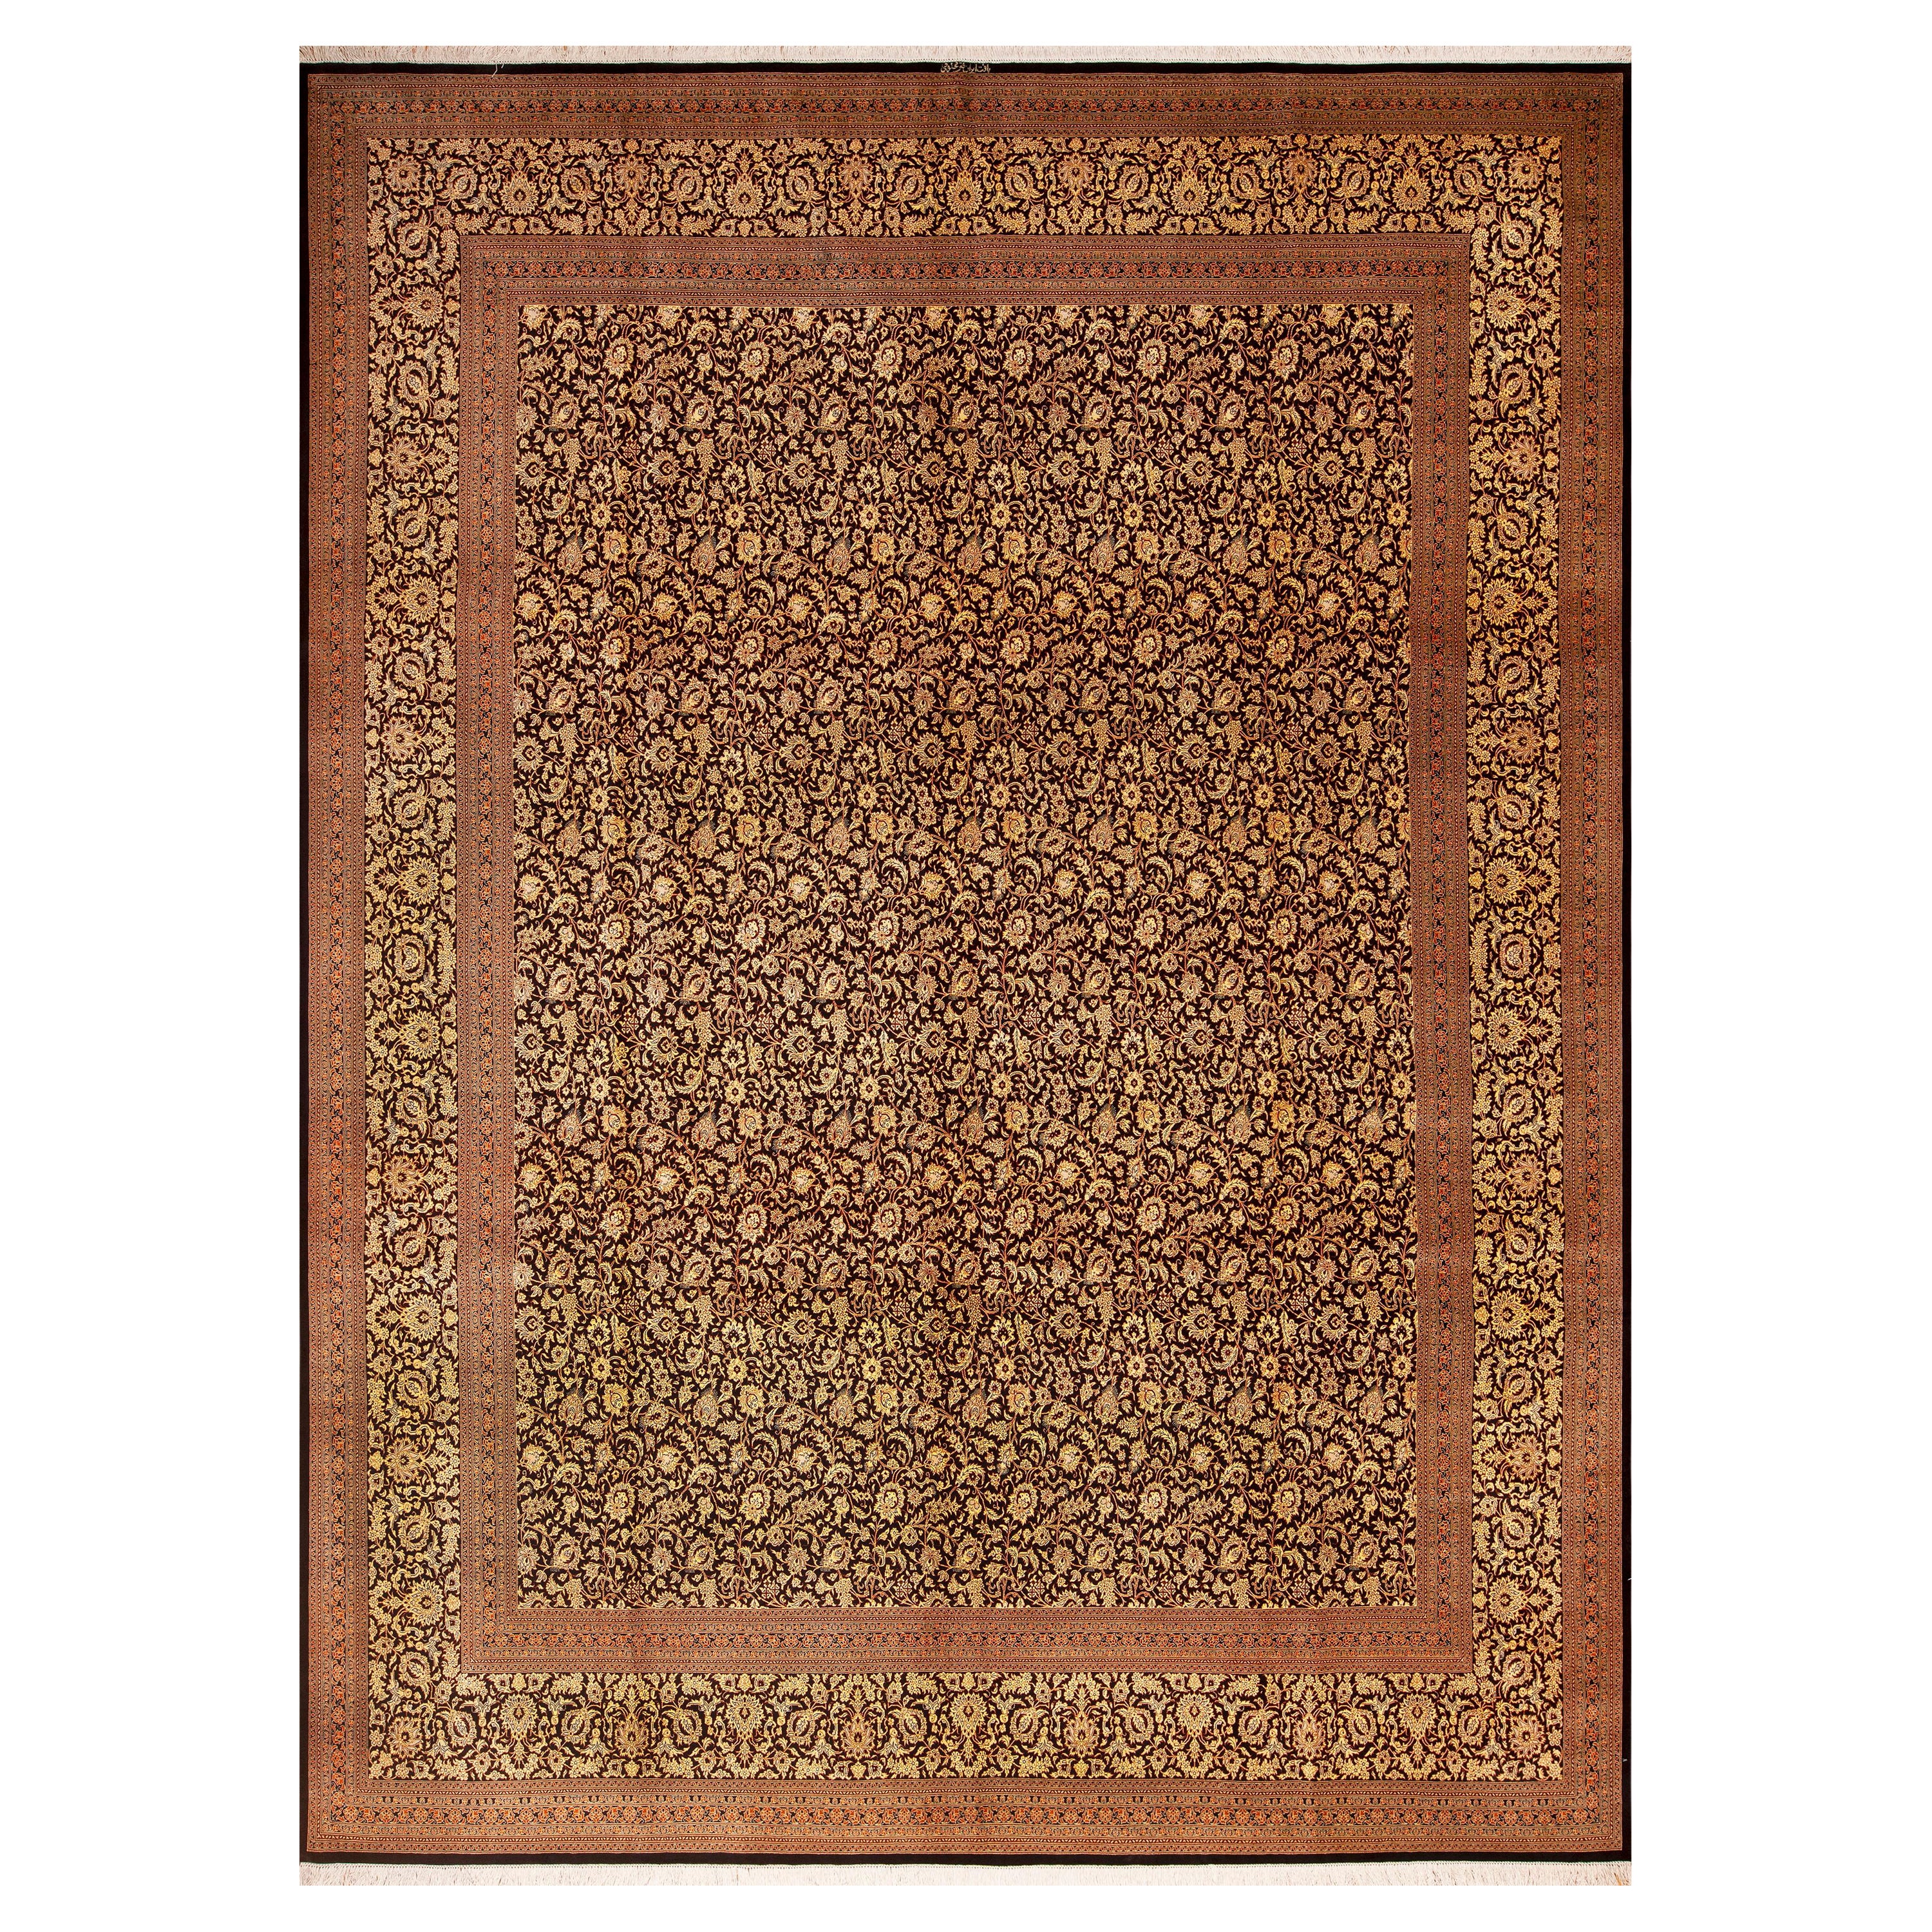 Beautiful Allover Floral Luxurious Vintage Persian Silk Qum Rug 9'9" x 12'10" For Sale